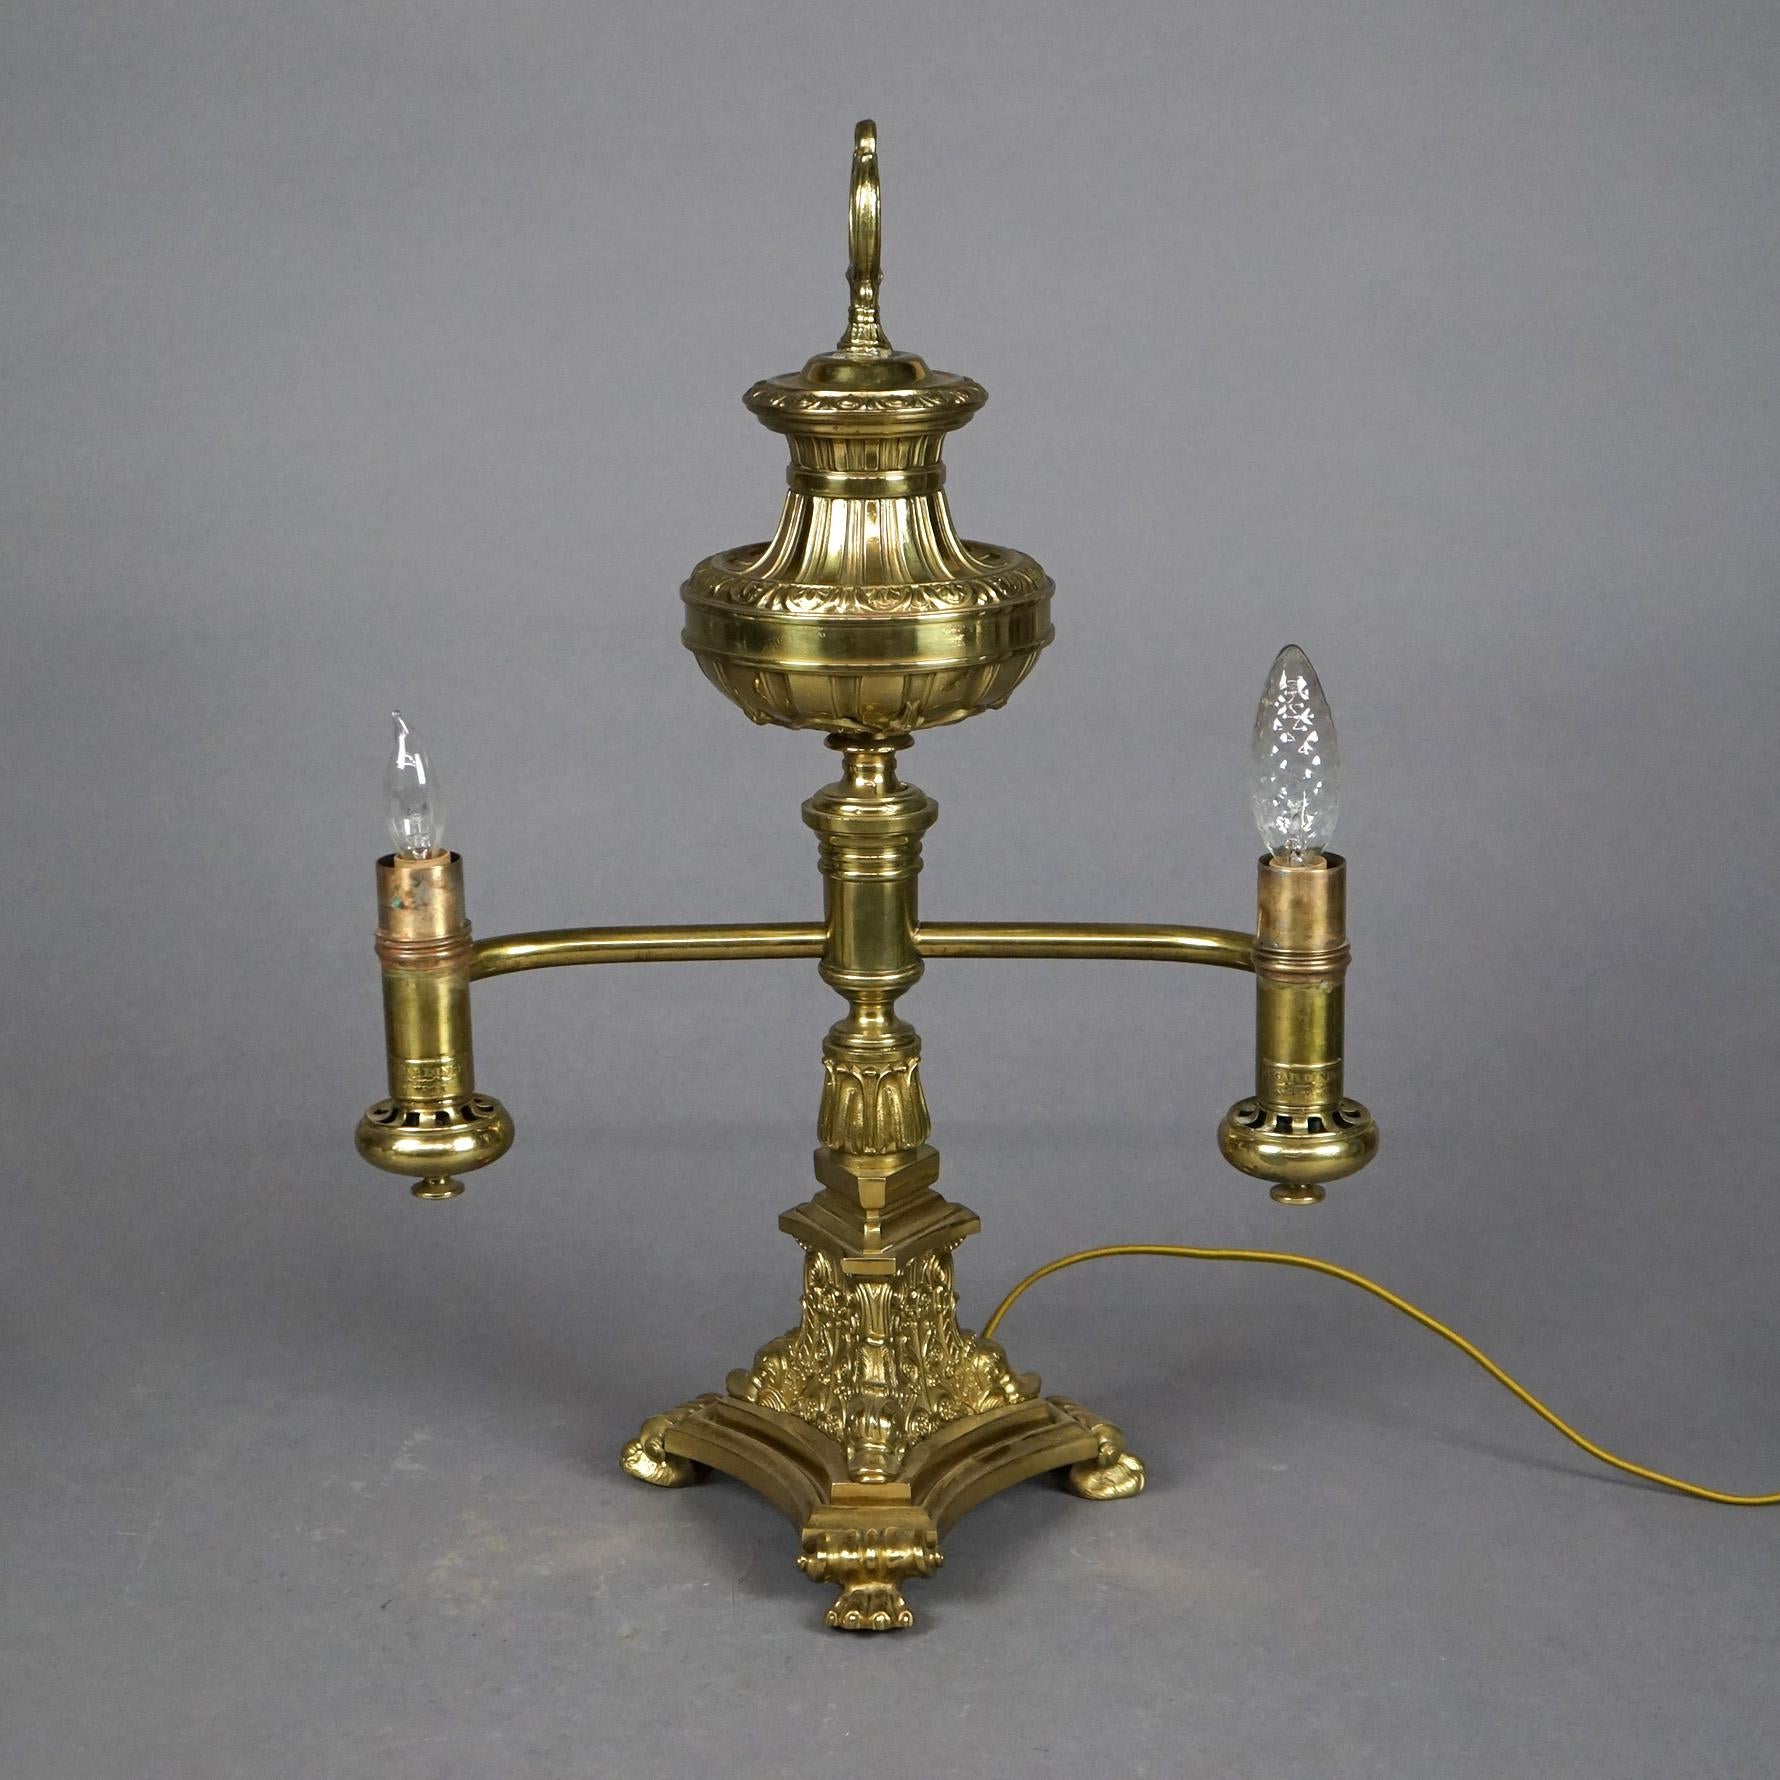 American Antique Gilt Brass & Bronze Double Argand Lamp with Shades, circa 1820